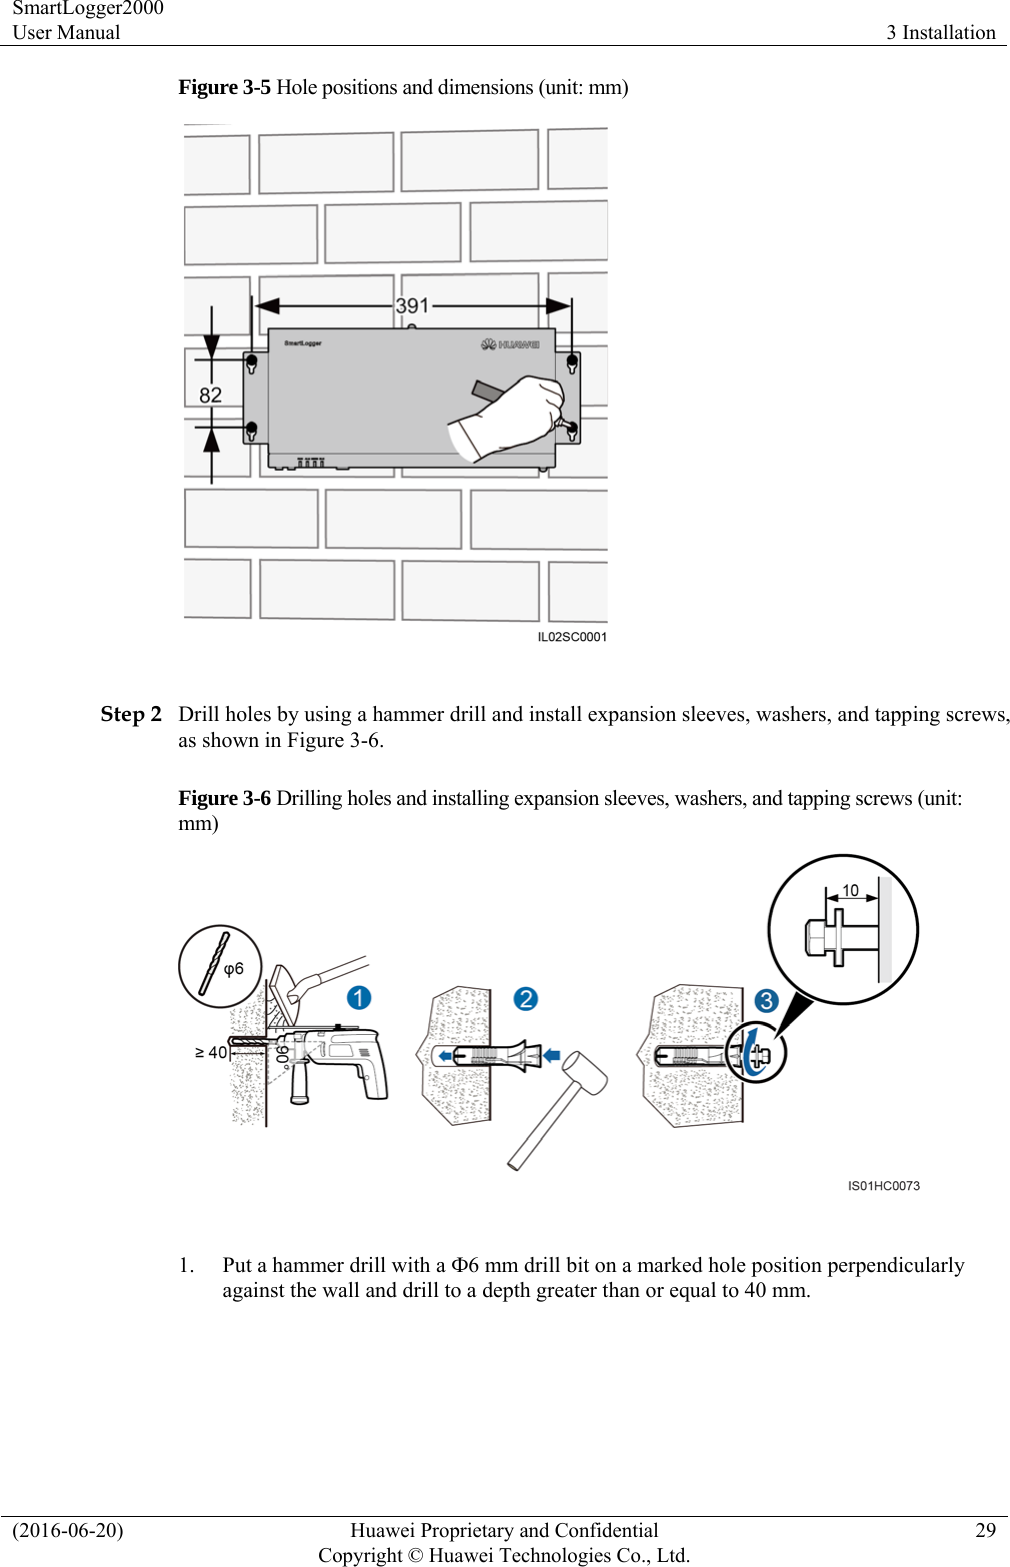 SmartLogger2000 User Manual  3 Installation (2016-06-20)  Huawei Proprietary and Confidential         Copyright © Huawei Technologies Co., Ltd.29 Figure 3-5 Hole positions and dimensions (unit: mm)   Step 2 Drill holes by using a hammer drill and install expansion sleeves, washers, and tapping screws, as shown in Figure 3-6. Figure 3-6 Drilling holes and installing expansion sleeves, washers, and tapping screws (unit: mm)   1. Put a hammer drill with a Ф6 mm drill bit on a marked hole position perpendicularly against the wall and drill to a depth greater than or equal to 40 mm.  